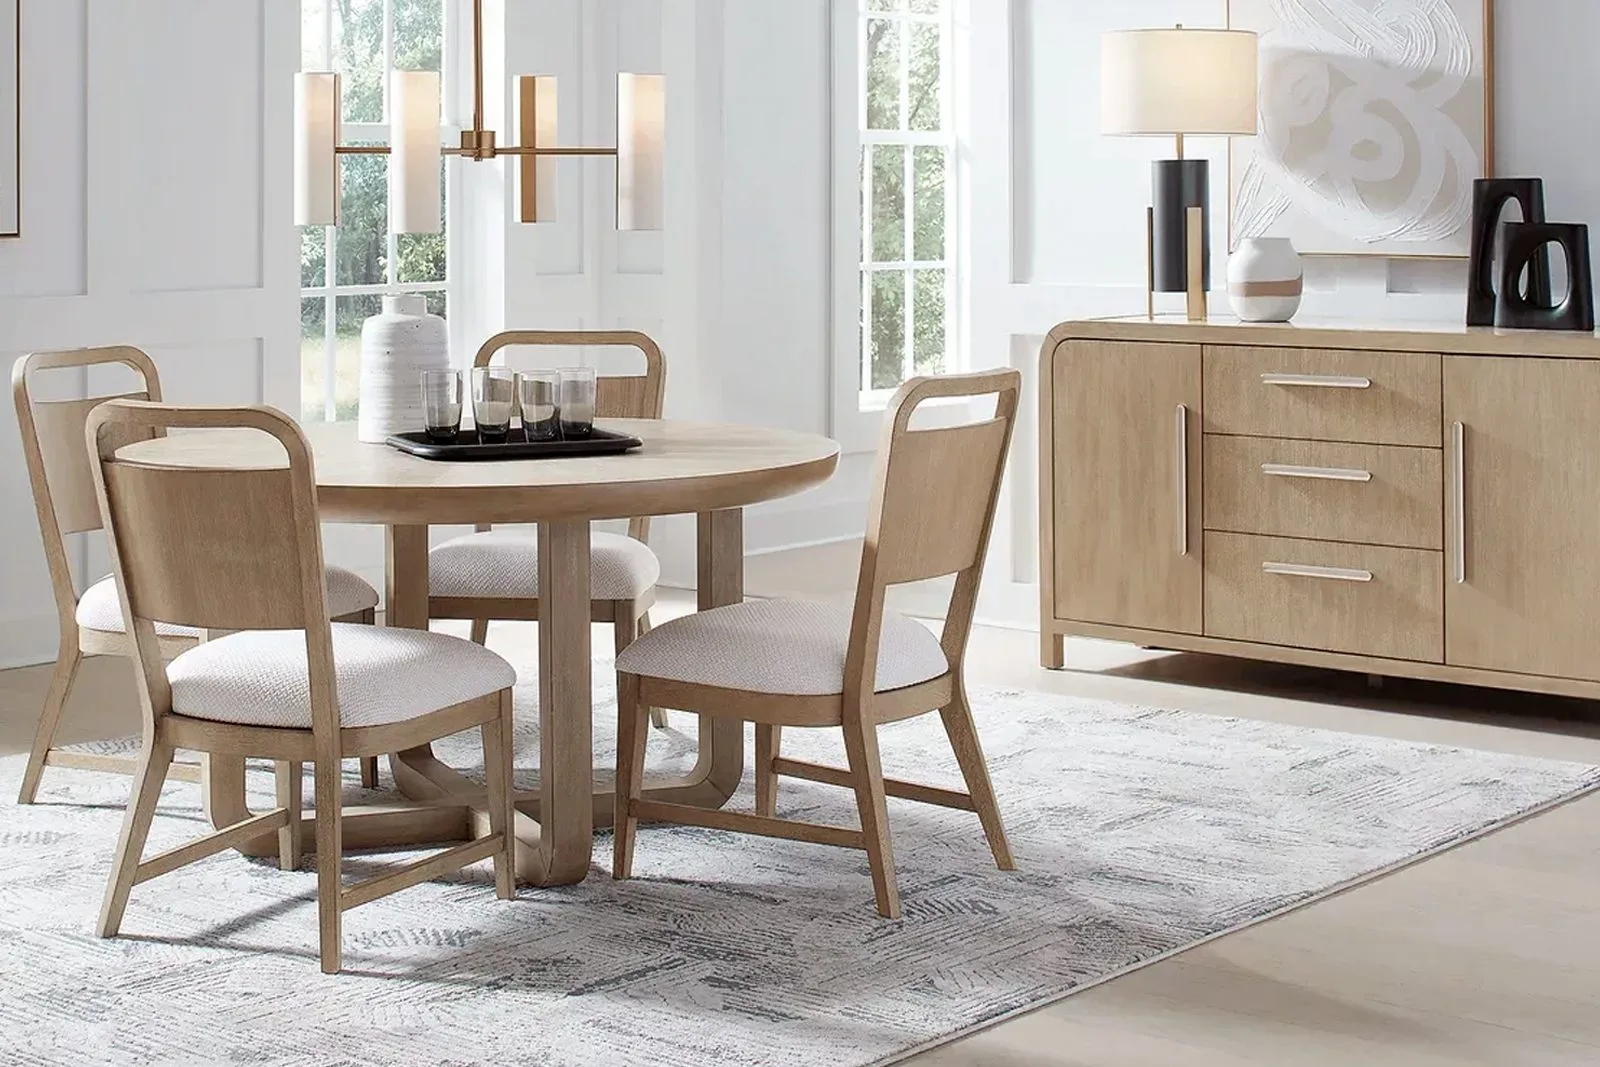 dining room set with birch wood